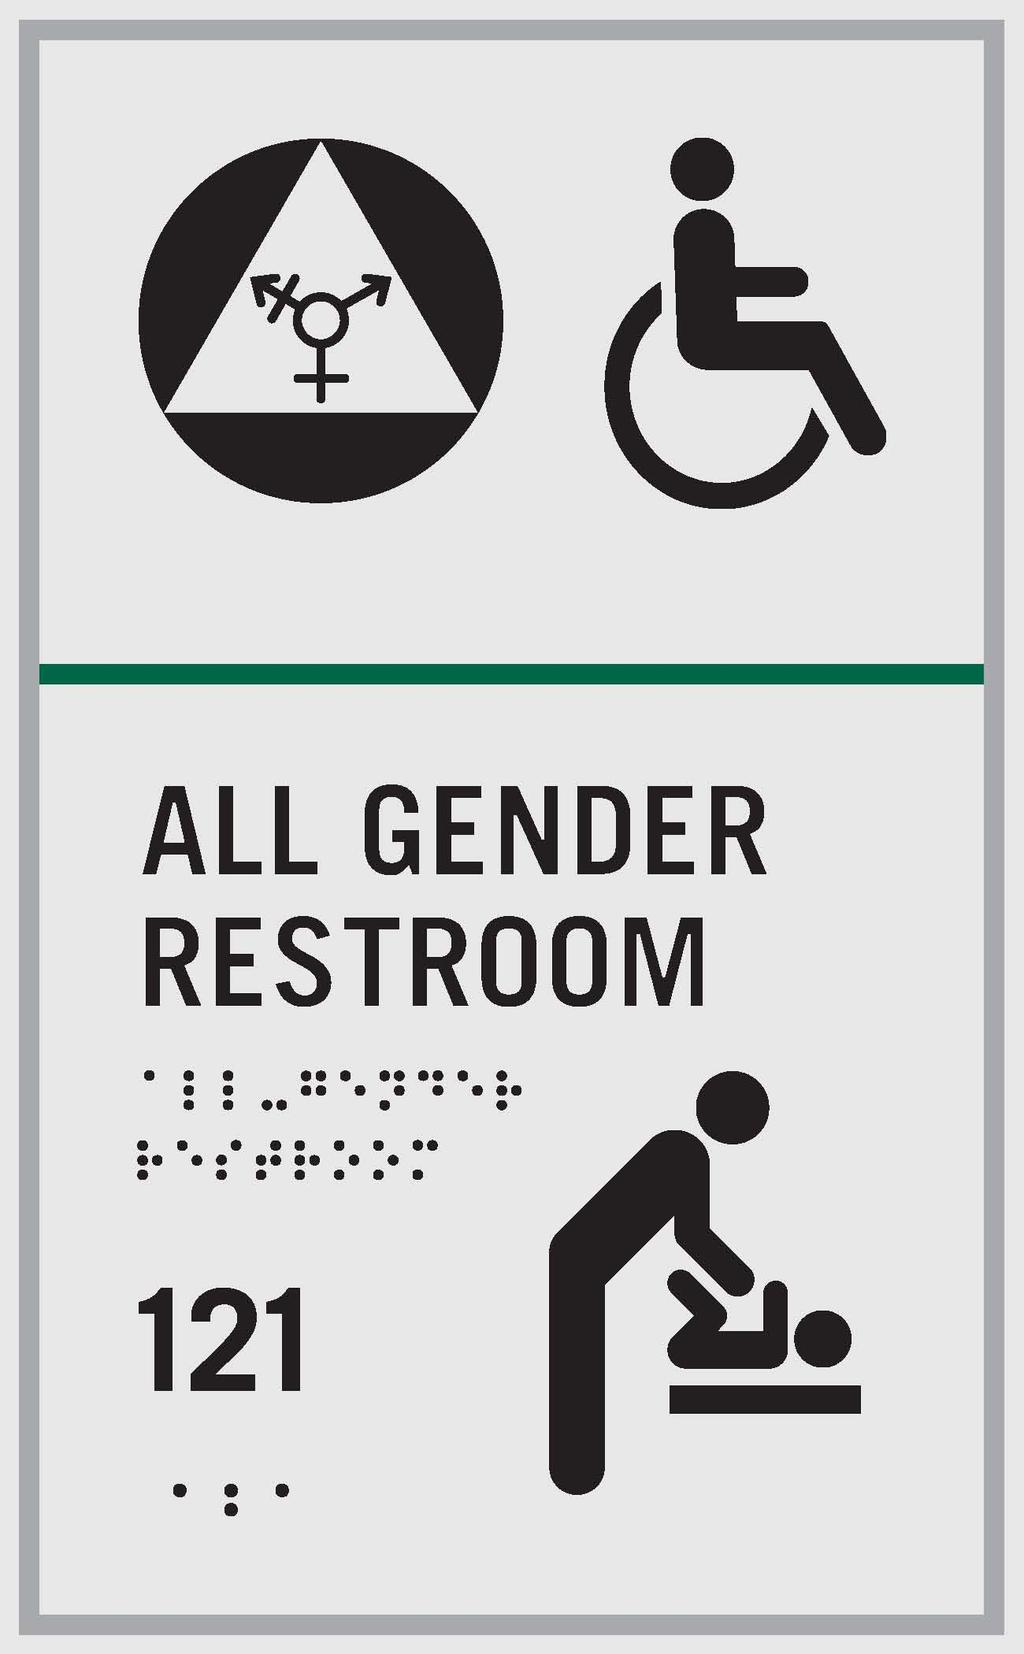 SECTION 2 Interior Sign Family Identification WOMEN IM128 G1 CENTRAL STAIR RESTROOM C ent ral St air Rest room Men Authorized Personnel Only MU285 FH100 MU285 FH 100 G2 Flag-Mounted ID 1'-0 1/4"w x